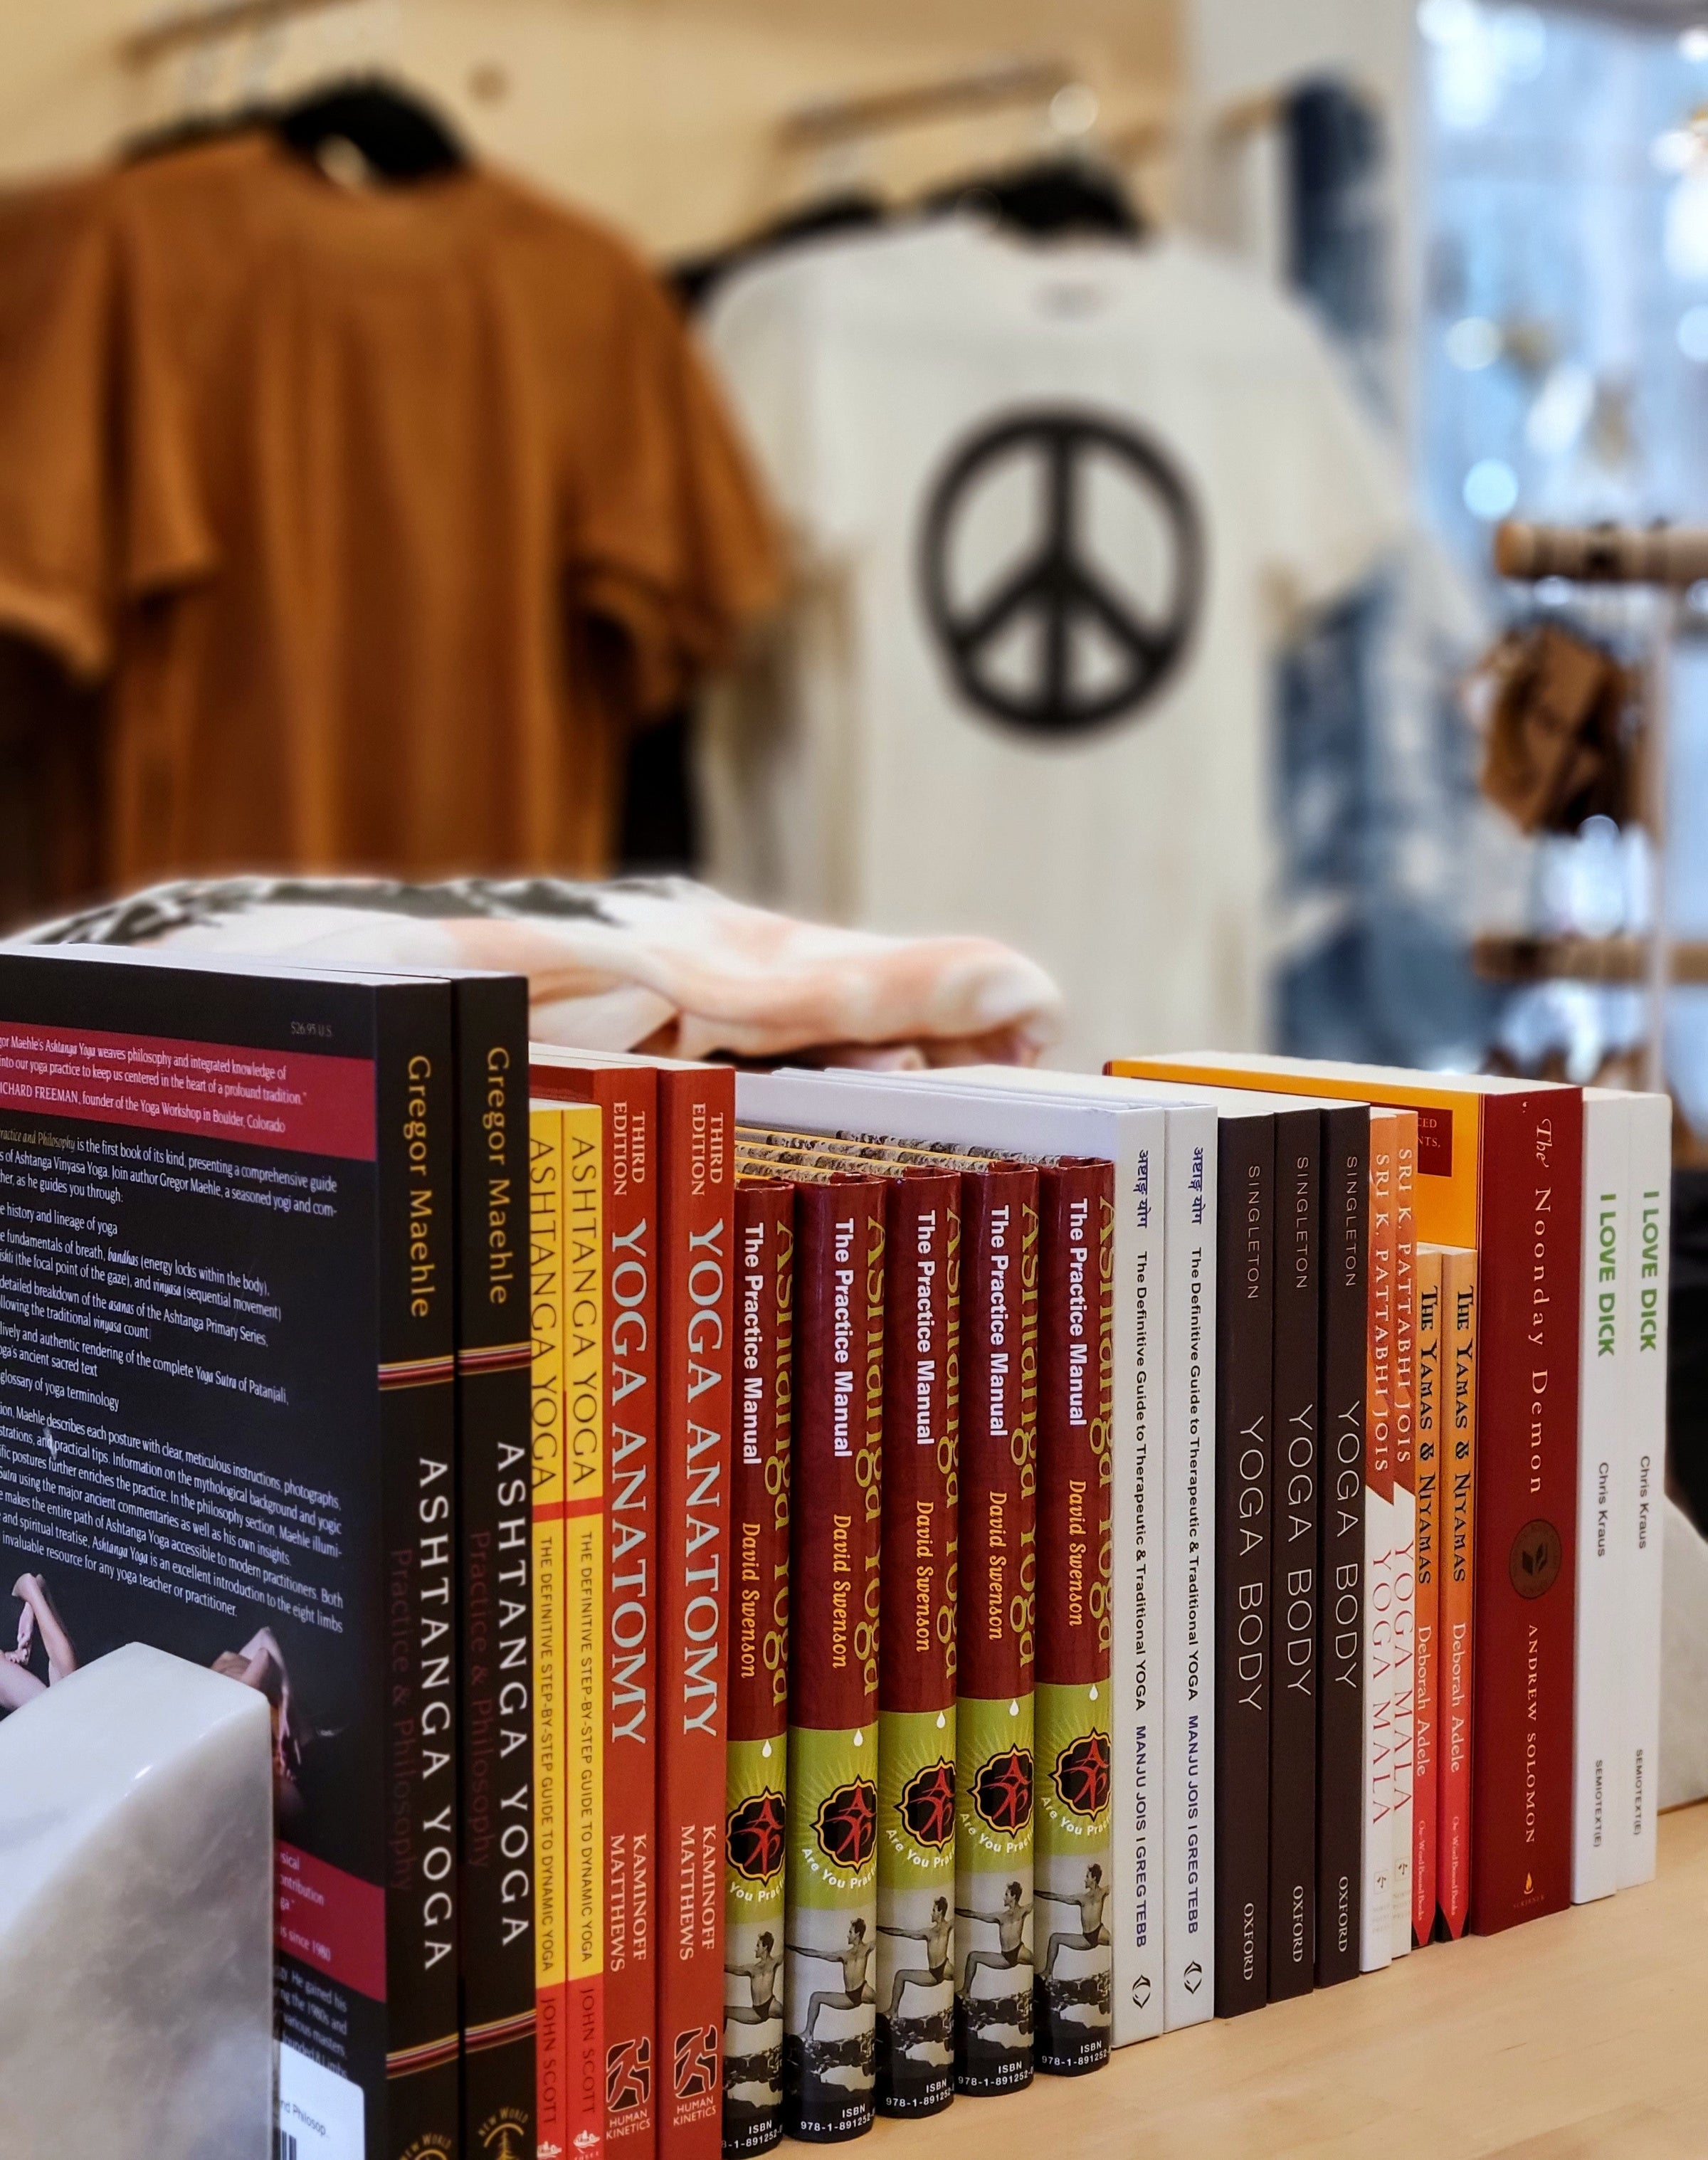 Yoga books on a shelf in front of a rack of t-shirts.